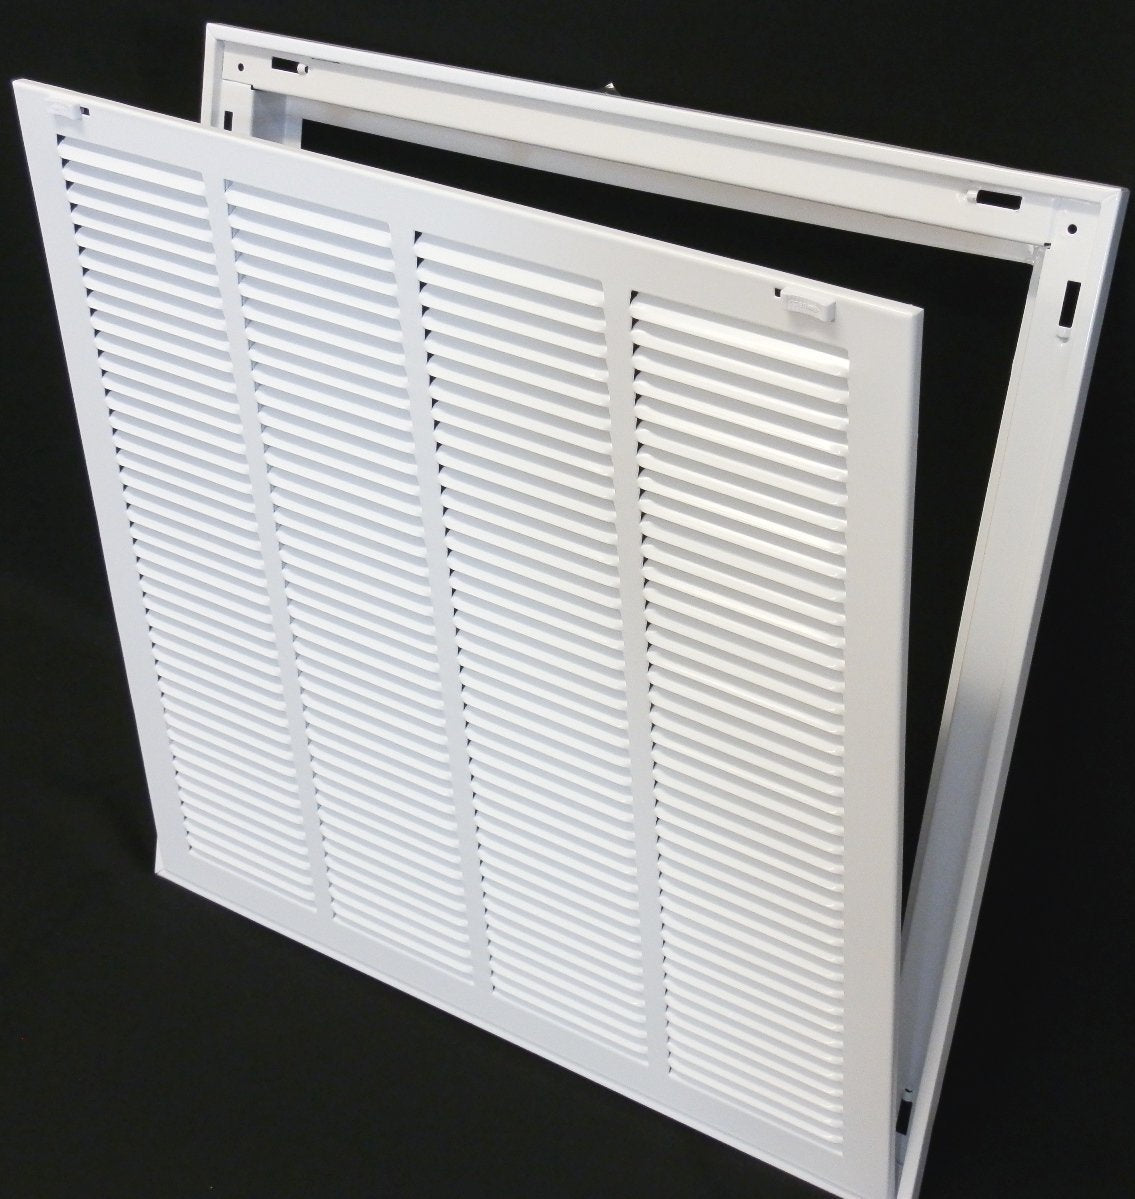 18&quot; X 16&quot; Steel Return Air Filter Grille for 1&quot; Filter - Removable Frame - [Outer Dimensions: 20 5/8&quot; X 18 5/8&quot;]